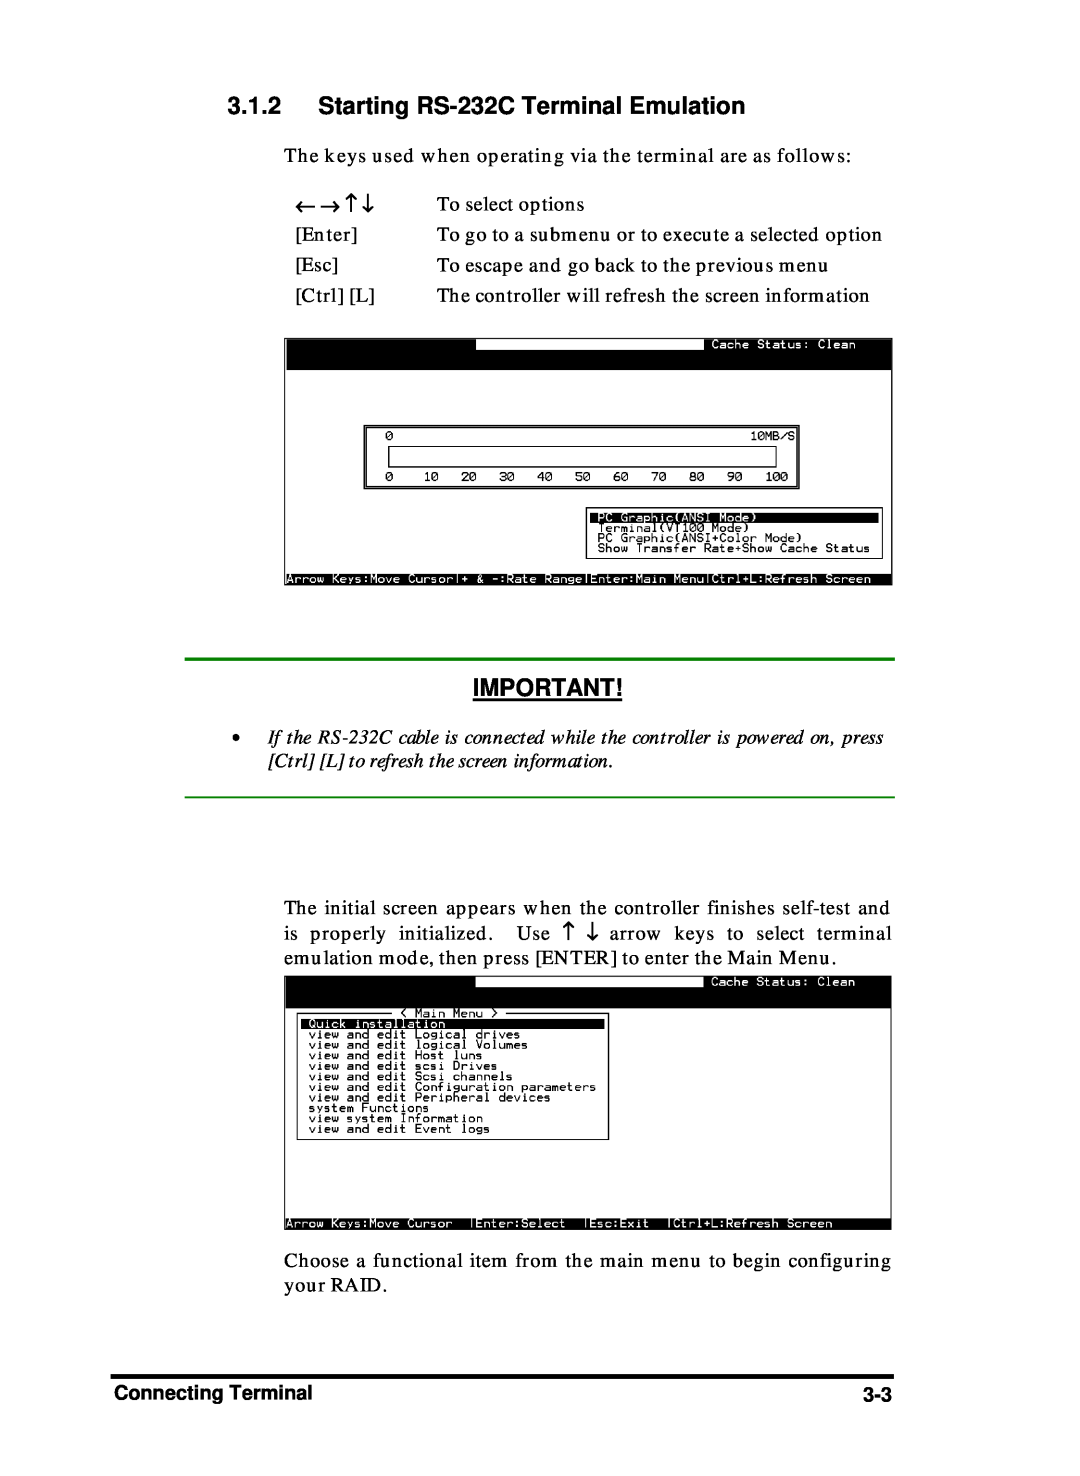 Compaq Infortrend manual Starting RS-232C Terminal Emulation, The keys used when operating via the terminal are as follows 